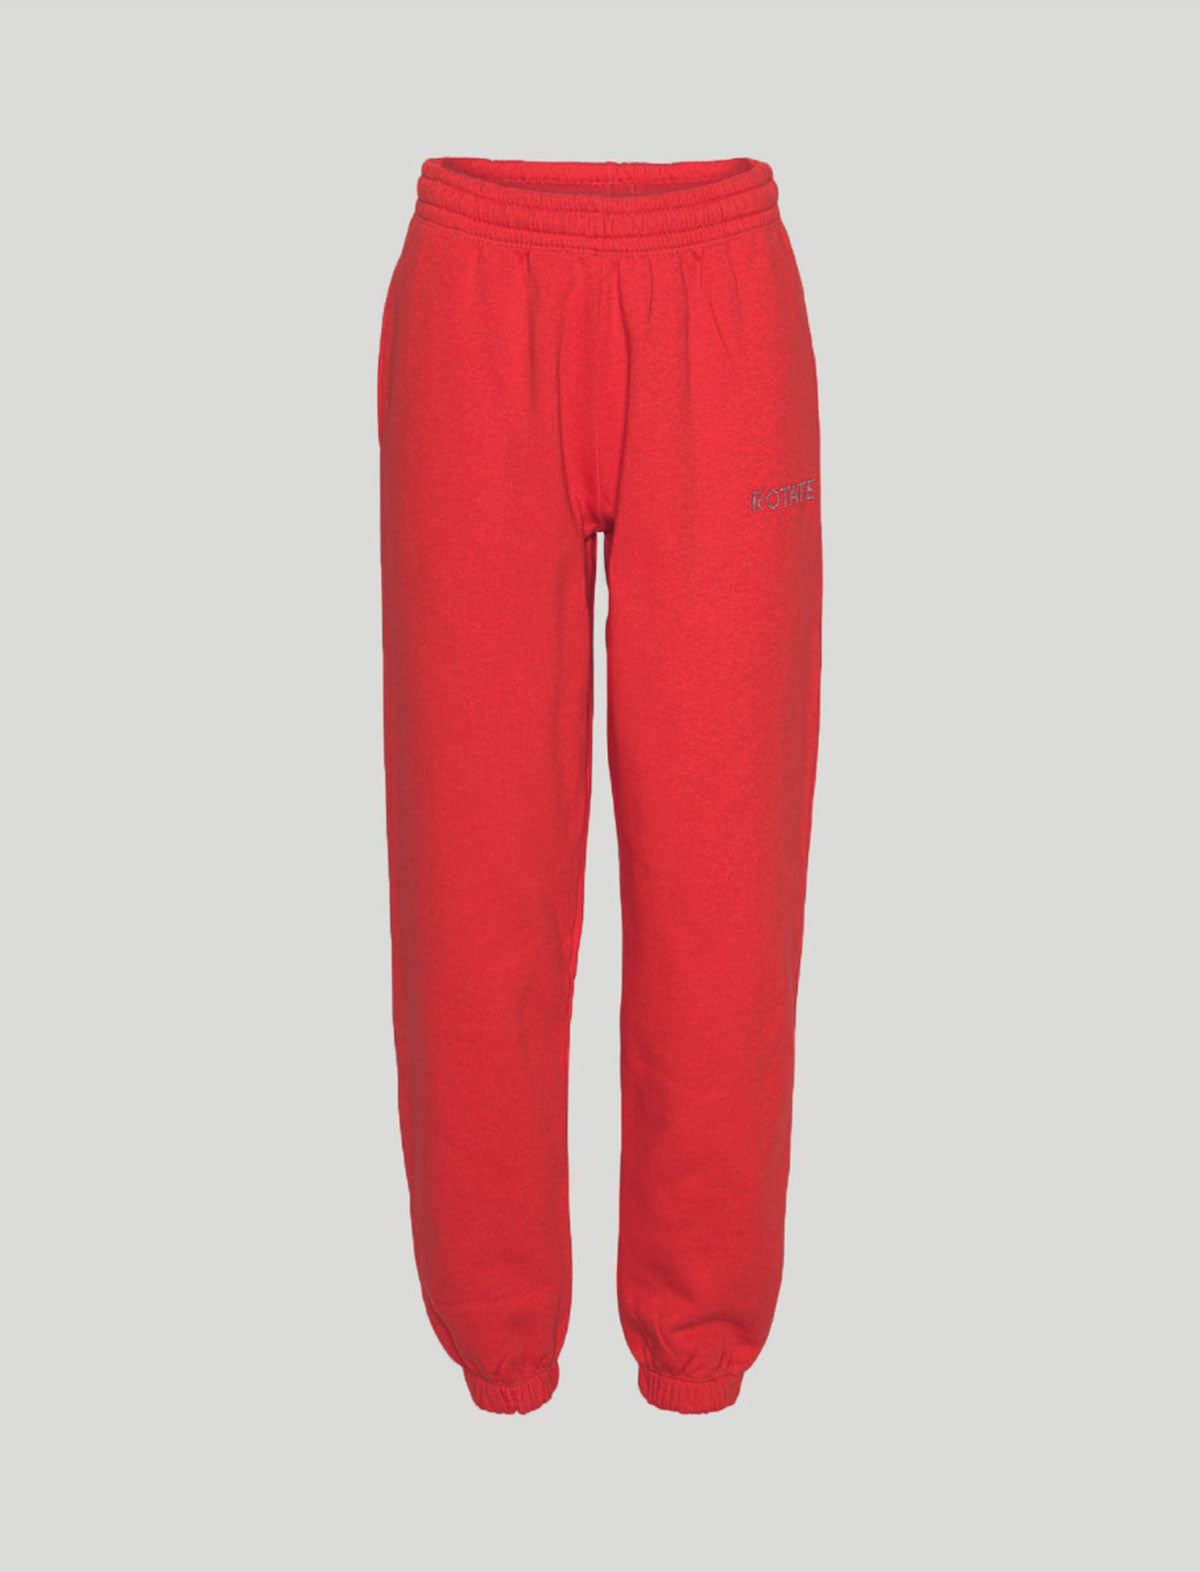 ROTATE SUNDAY 6 Crystal Logo Sweatpants in Fiery Red